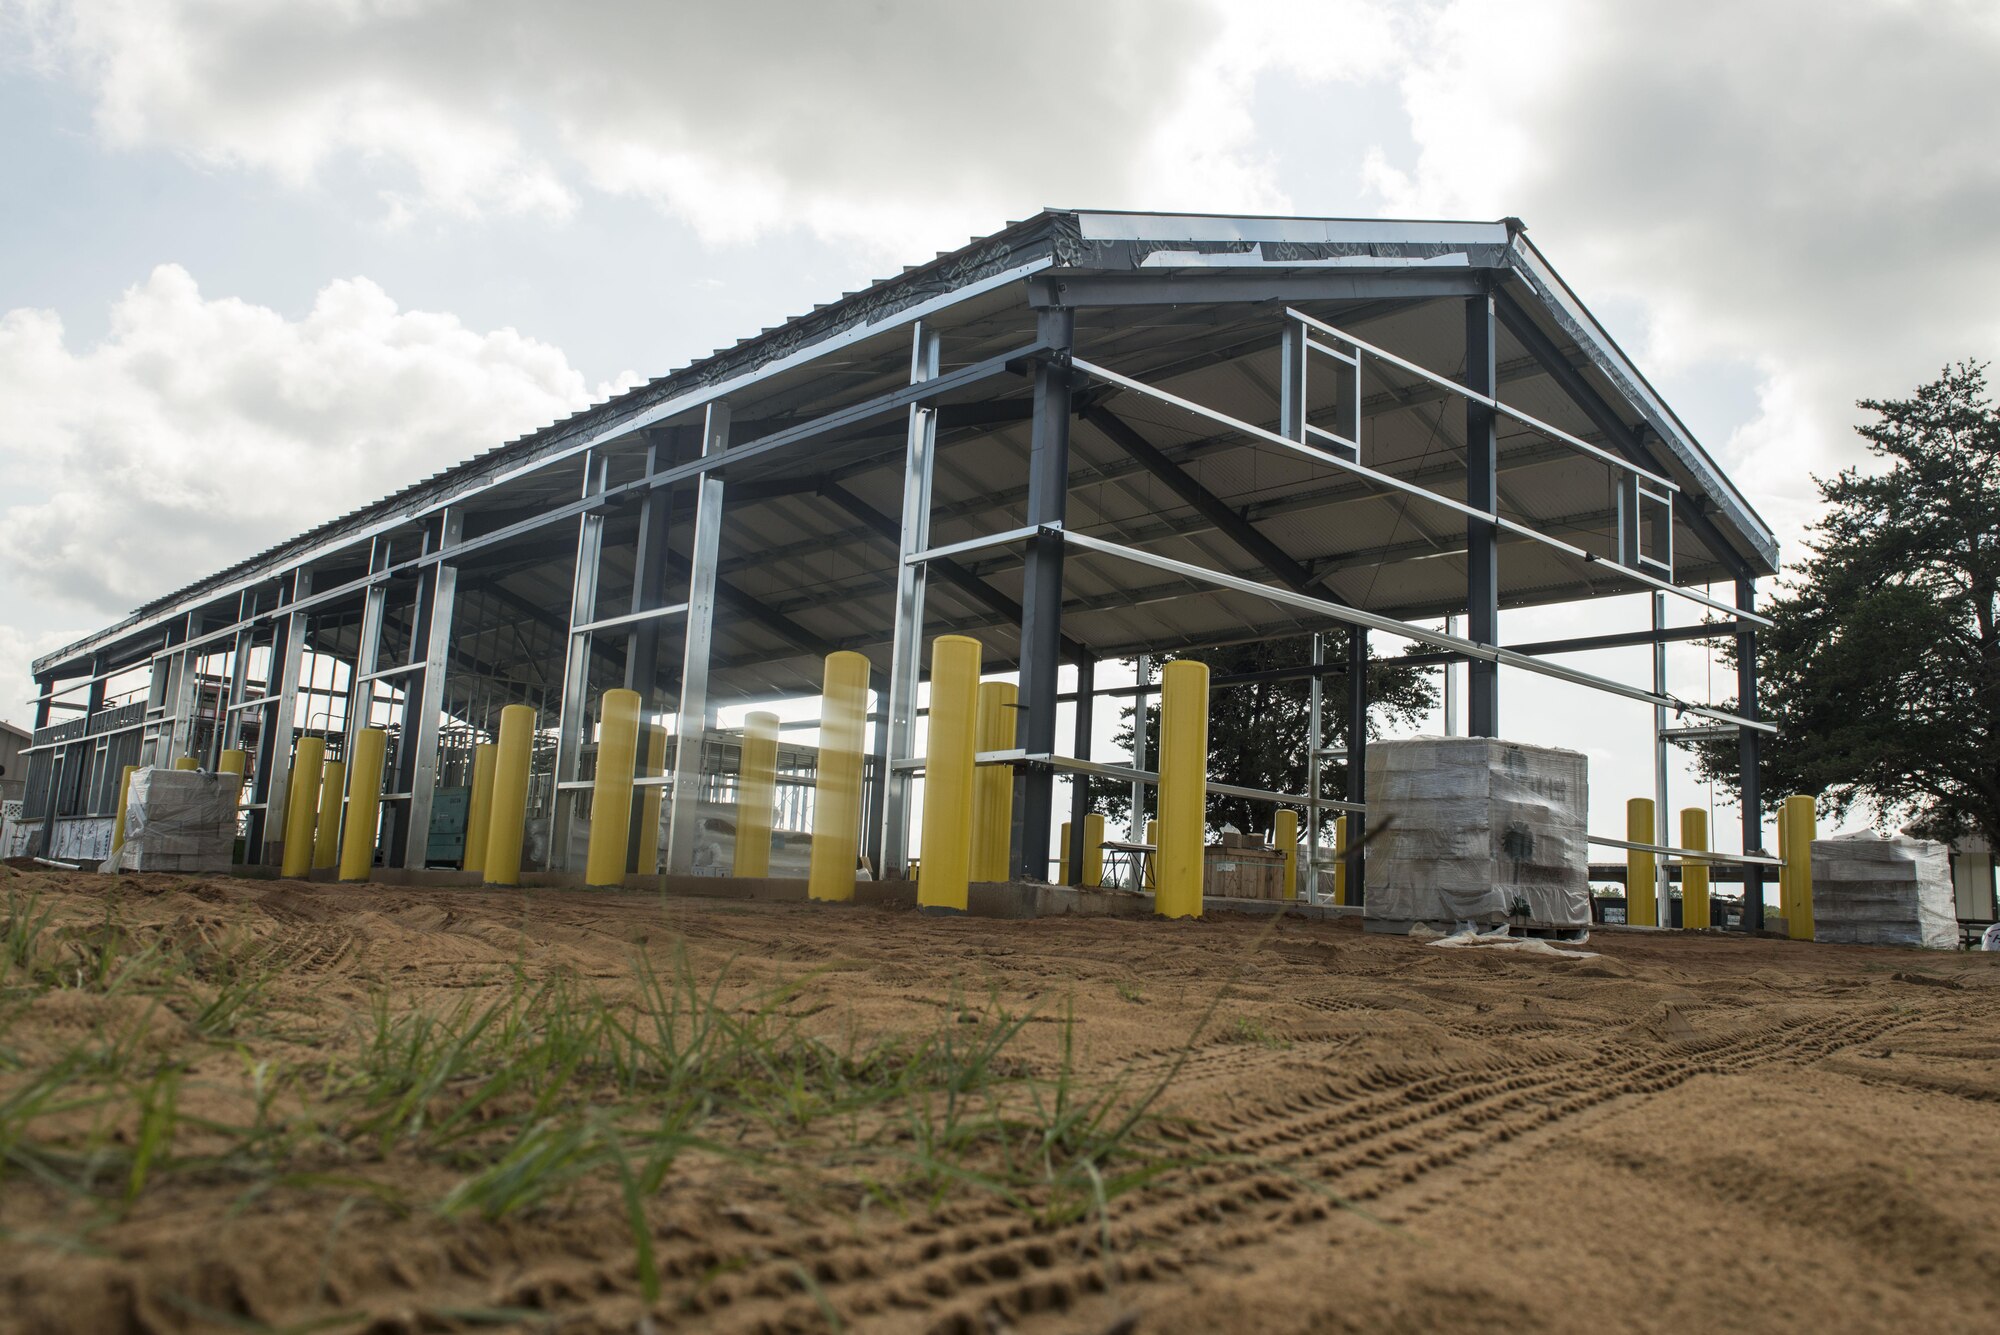 The unfinished Shaw Wildland Support Module building stands at Poinsett Electronic Combat Range, near Wedgefield, S.C., Oct. 11, 2017.